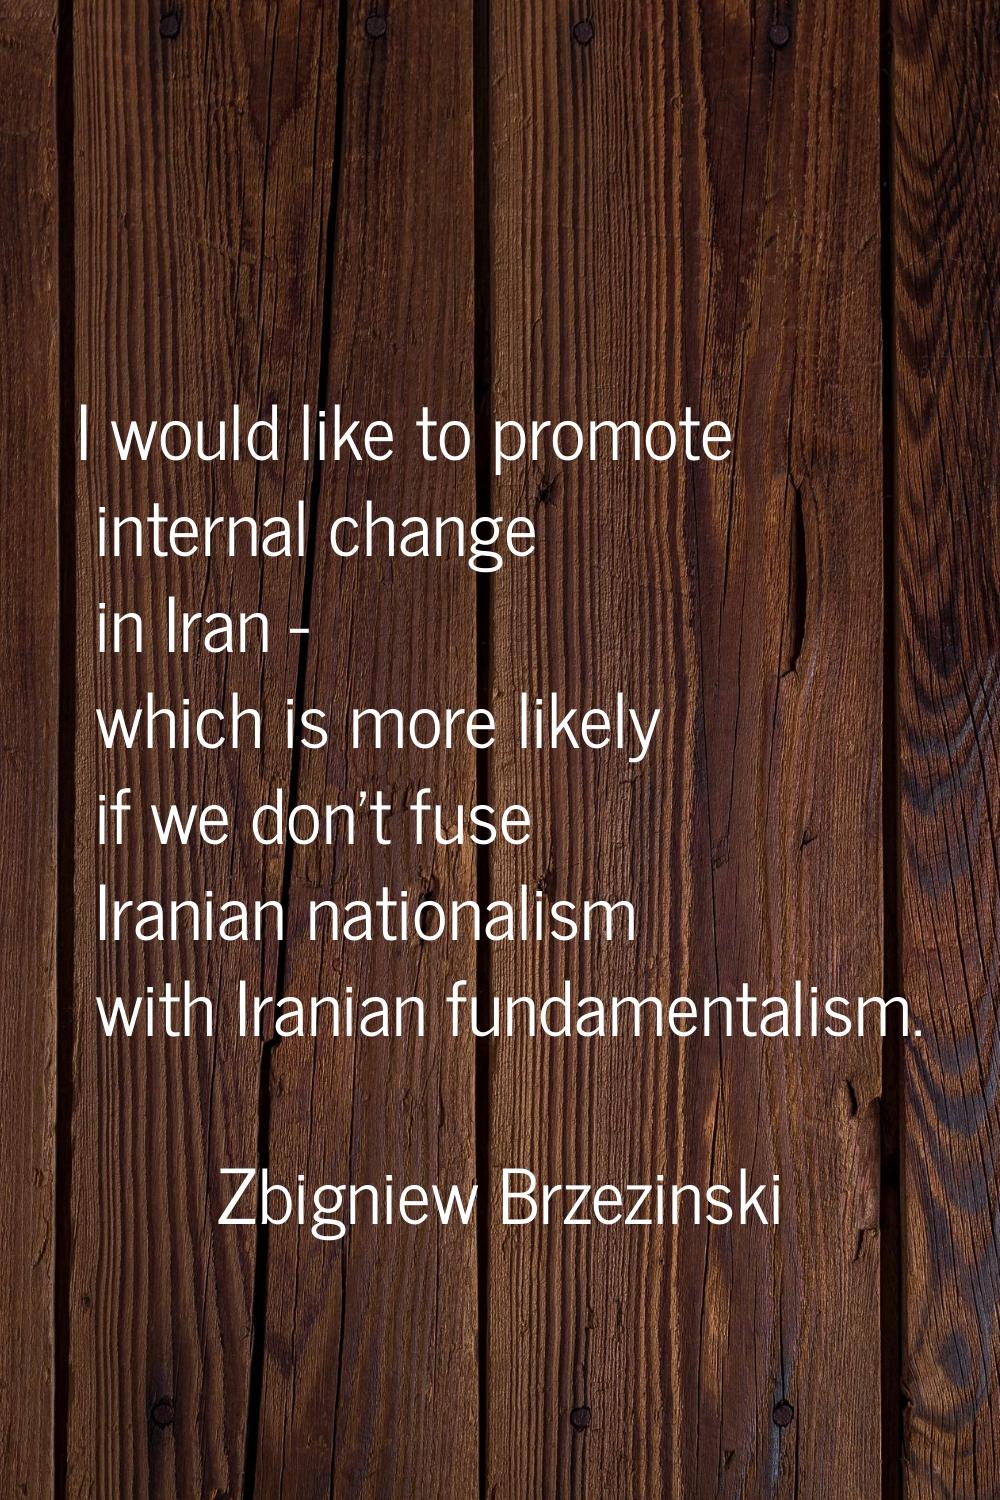 I would like to promote internal change in Iran - which is more likely if we don't fuse Iranian nat